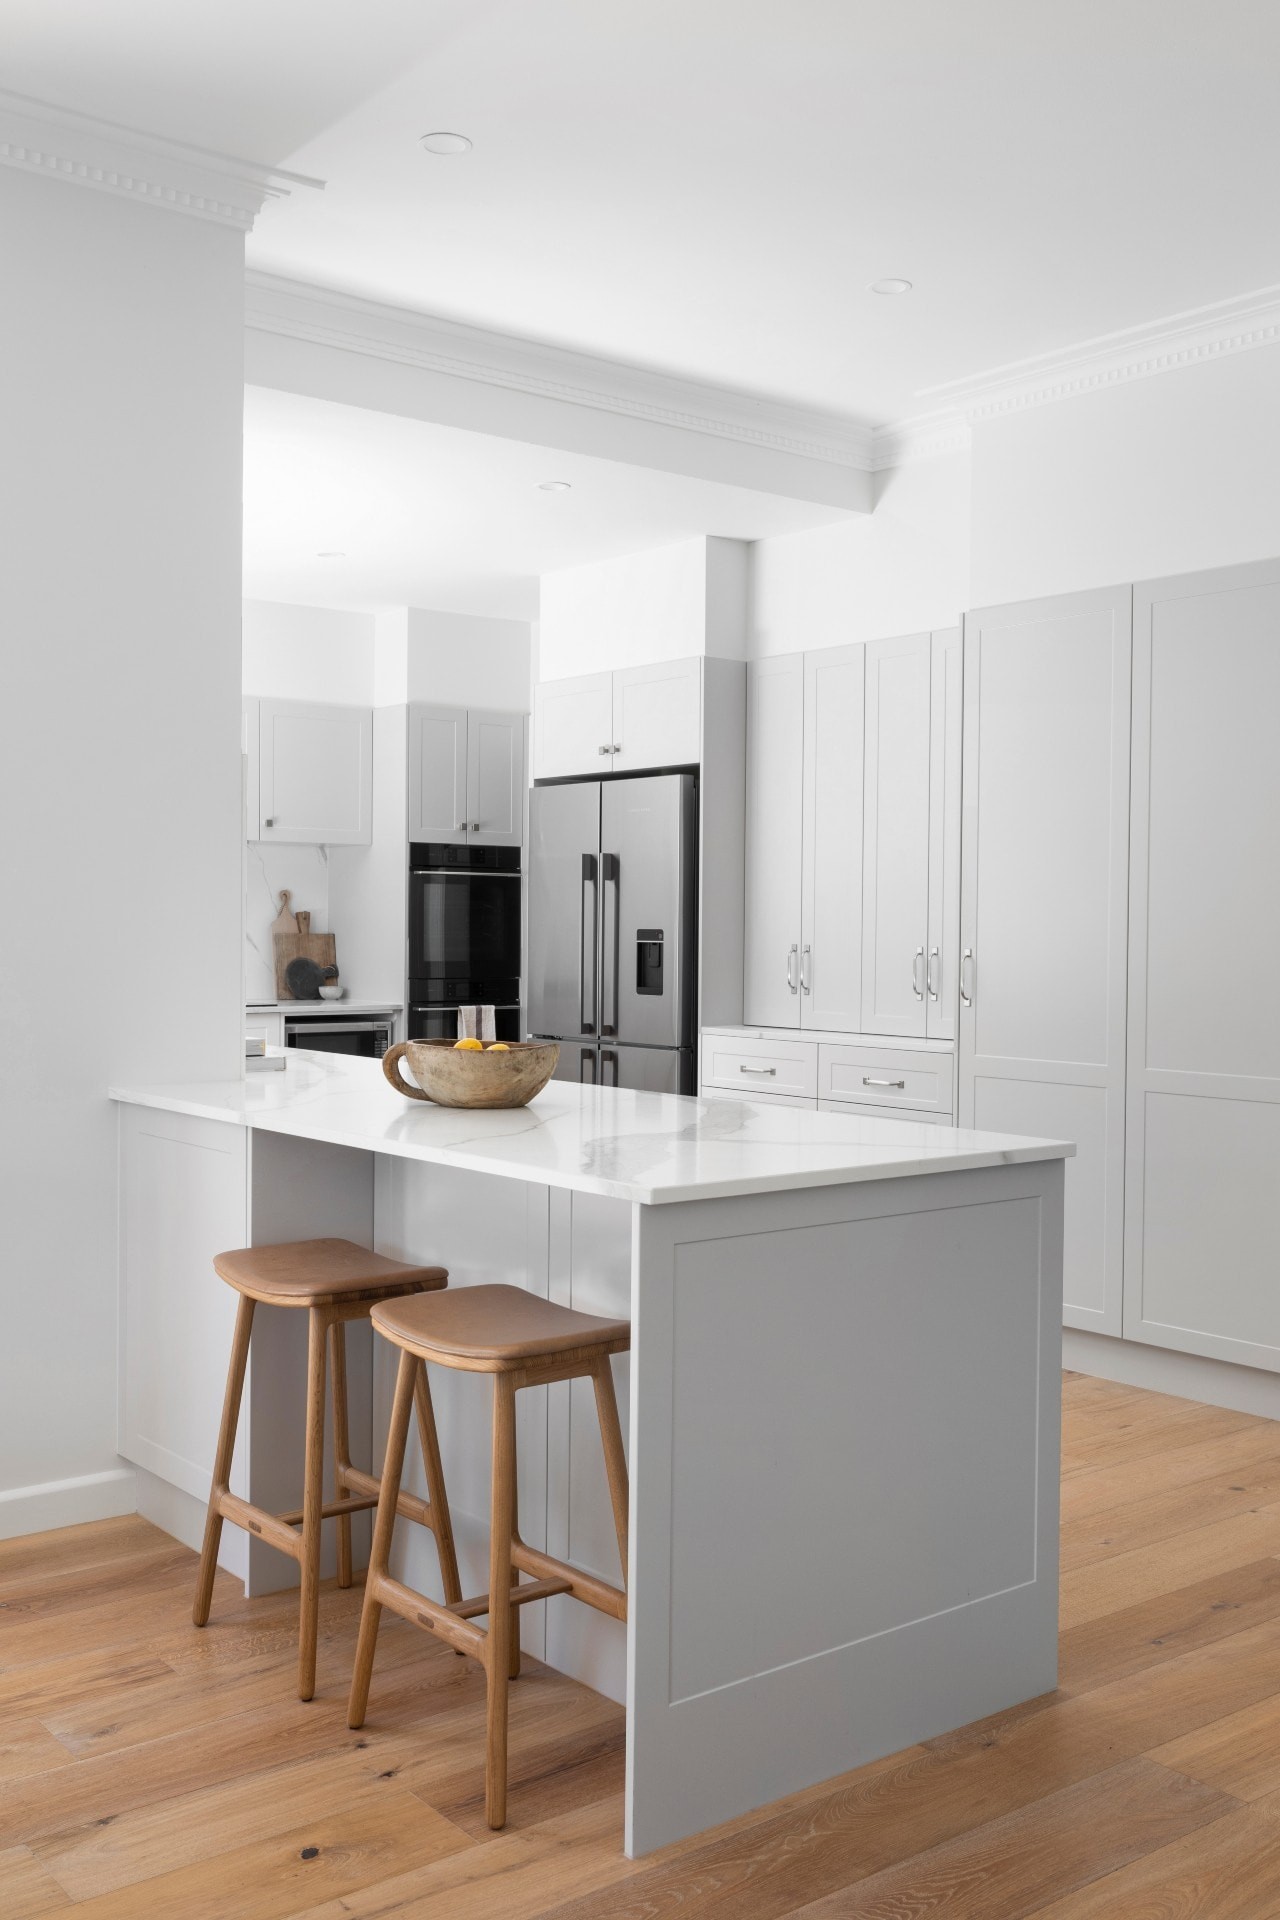 light grey shaker style kitchen with oak flooring and white countertop